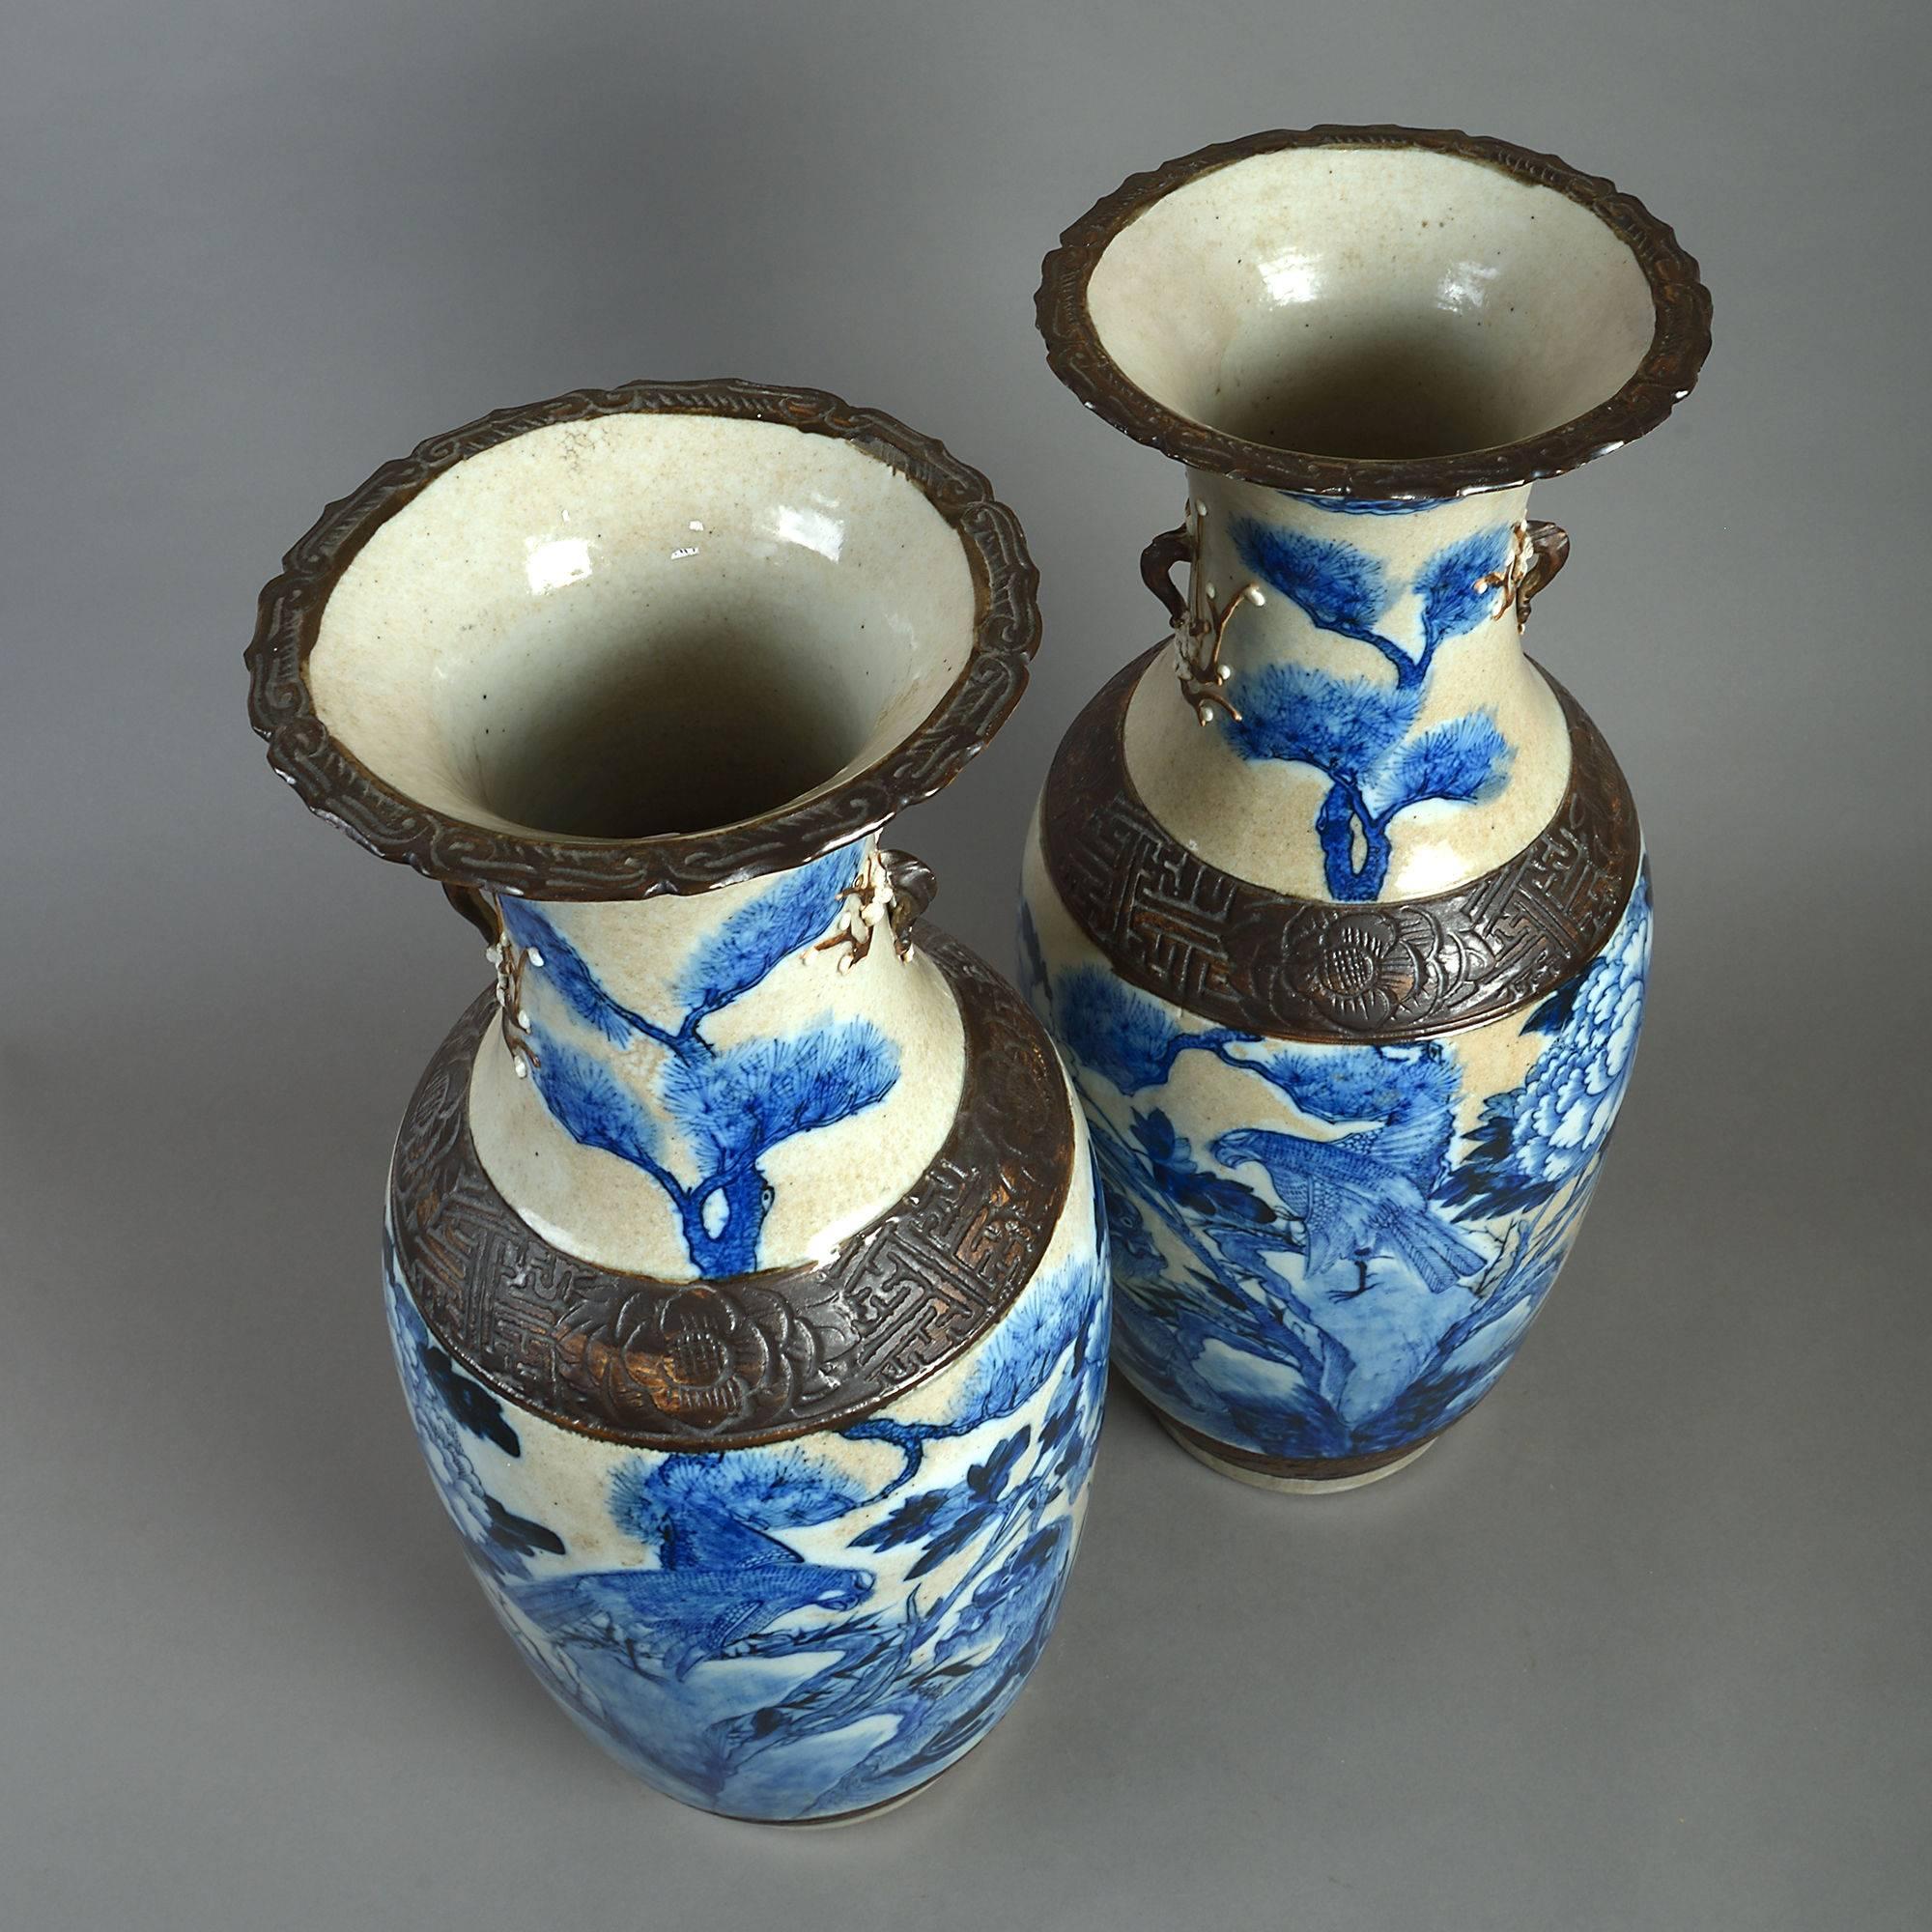 Late 19th Century 19th Century Large-Scale Pair of Blue and White and Crackle Glaze Vases